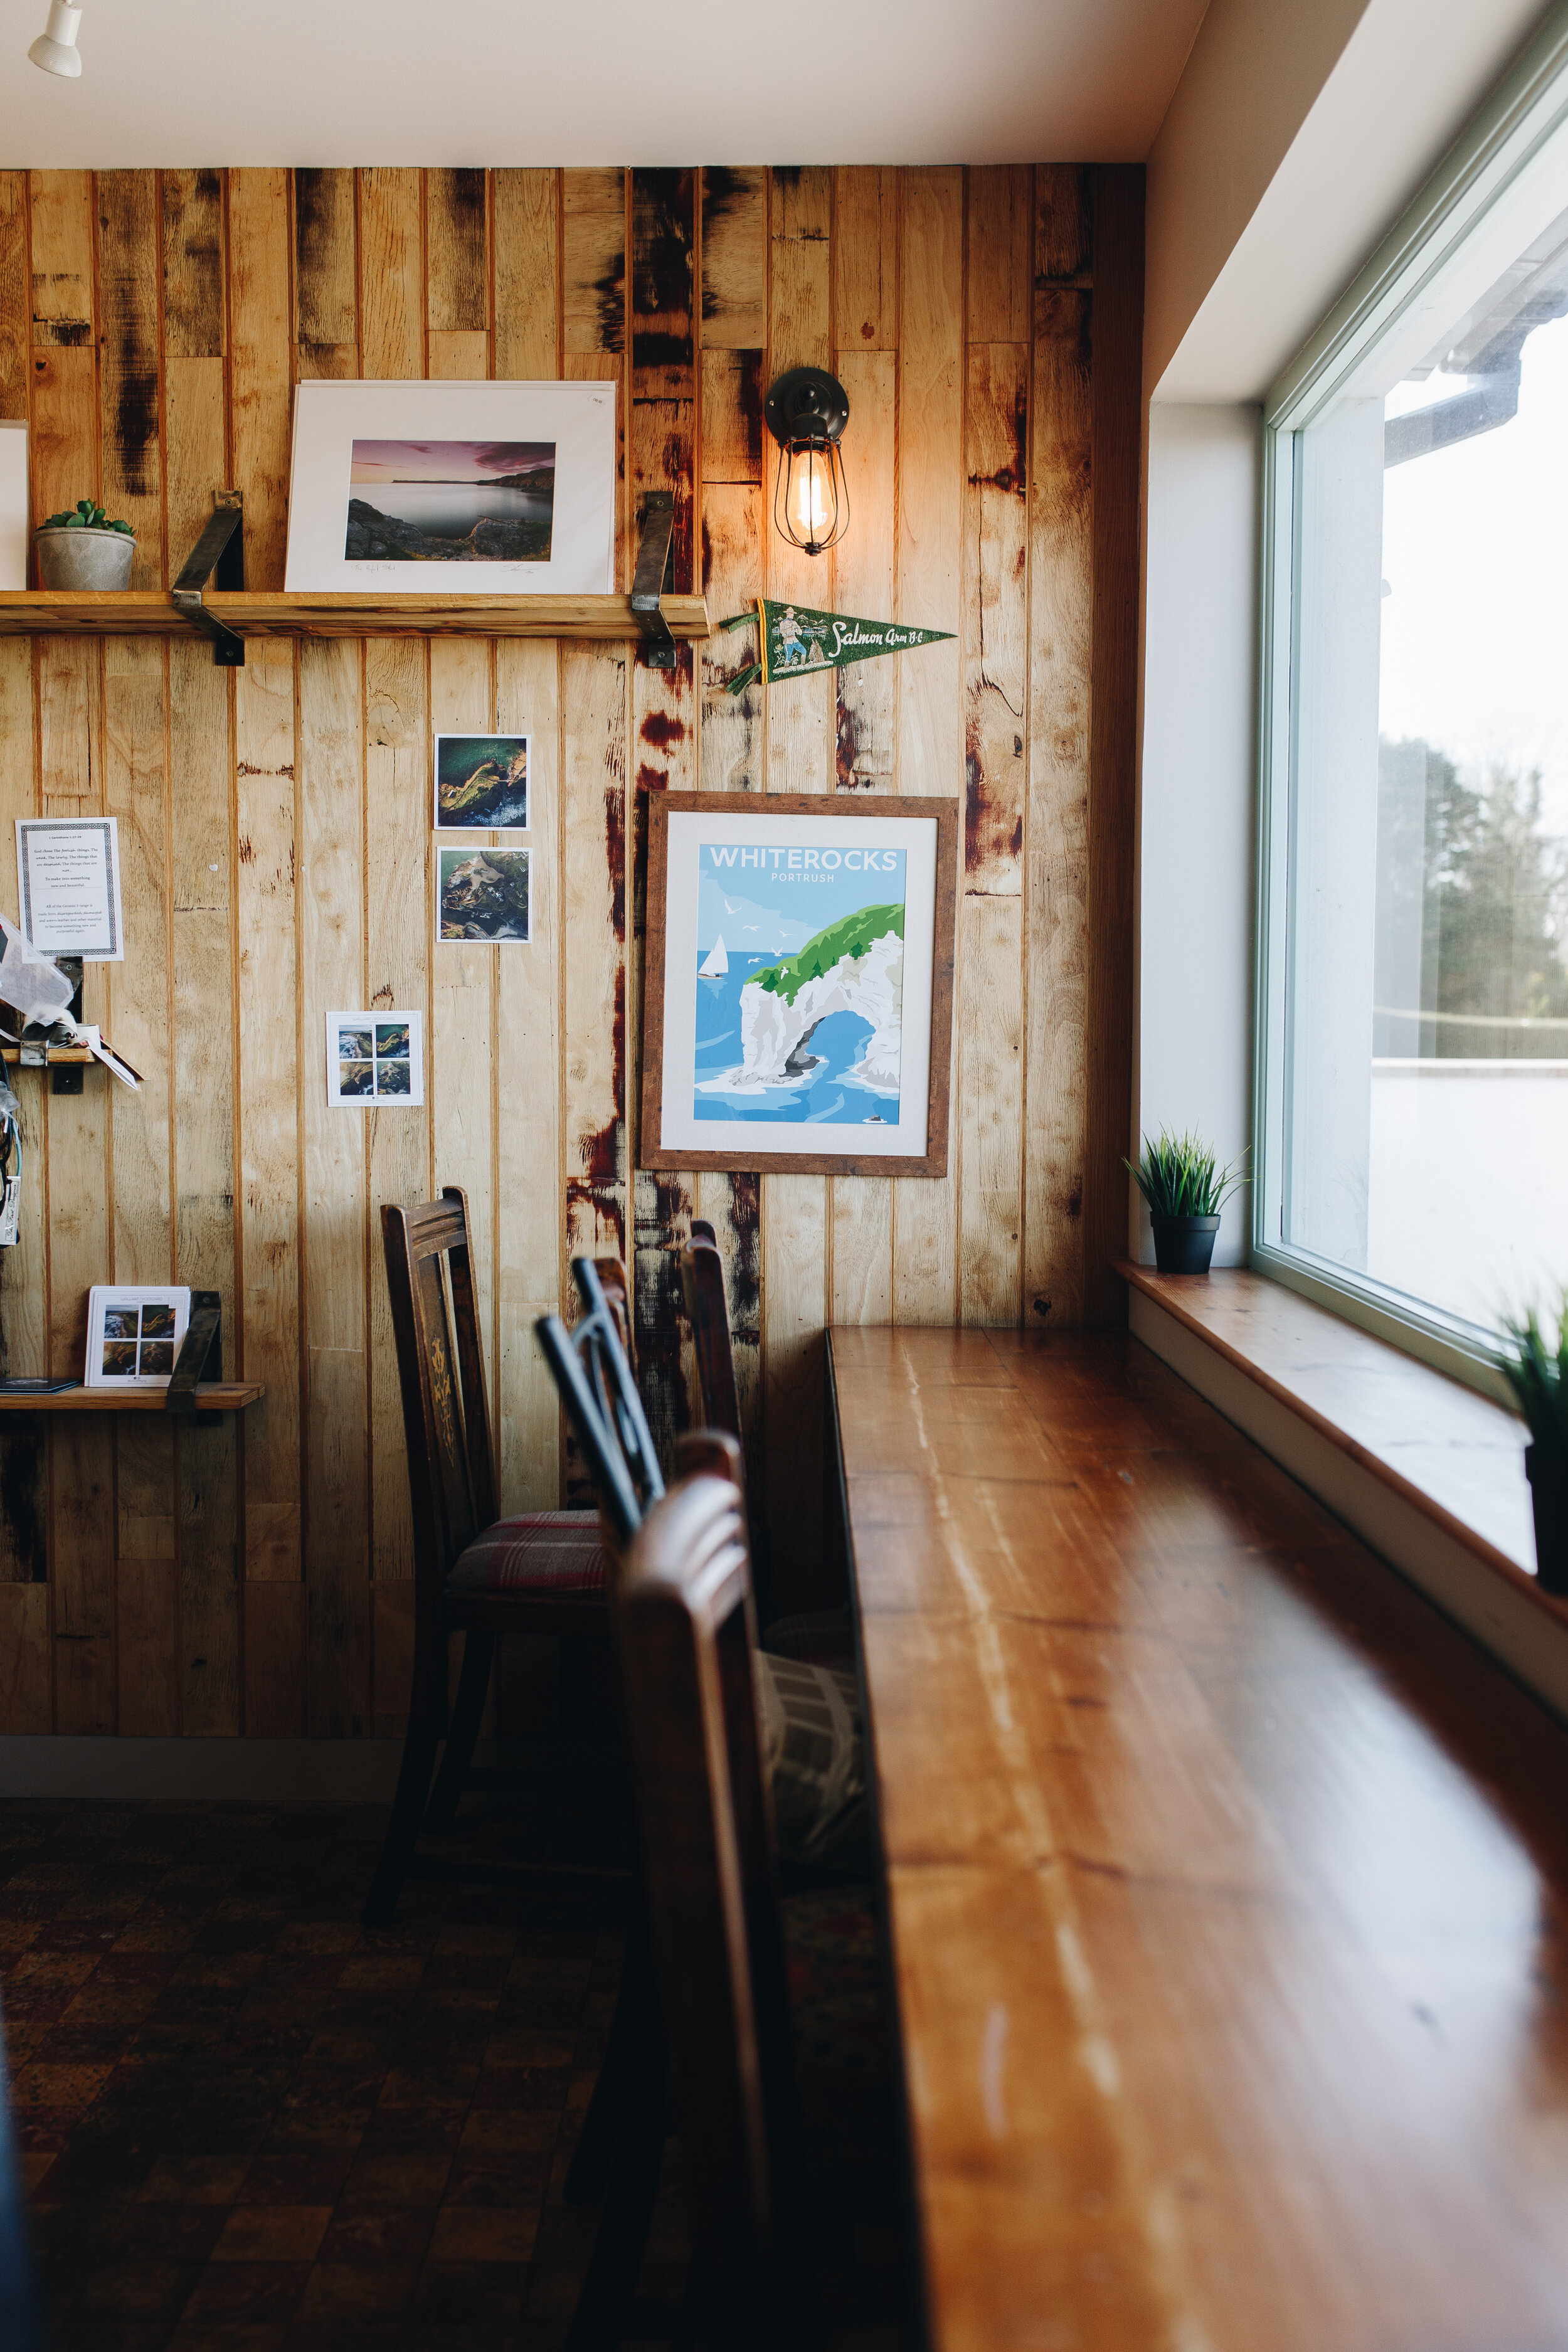 91 Magaziane - Instagrammer's Guide to Northern Ireland - Bothy Coffee